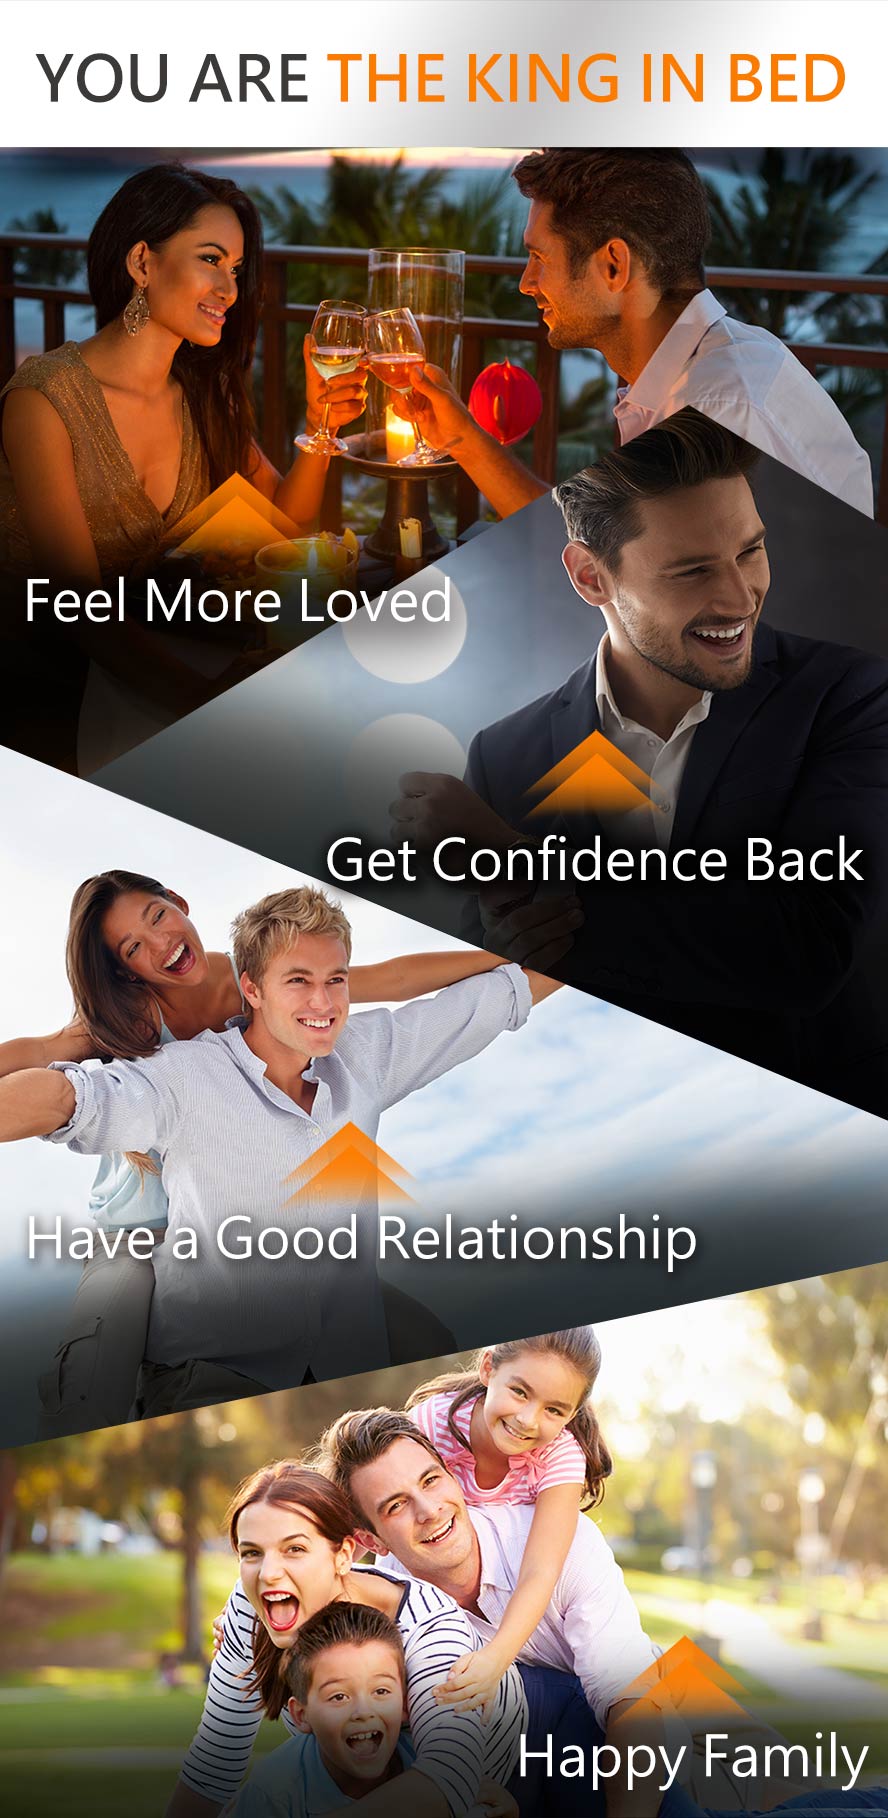 Higher up confidence on bed, perform better and satisfy your partner with UNIQMAN maca and damiana